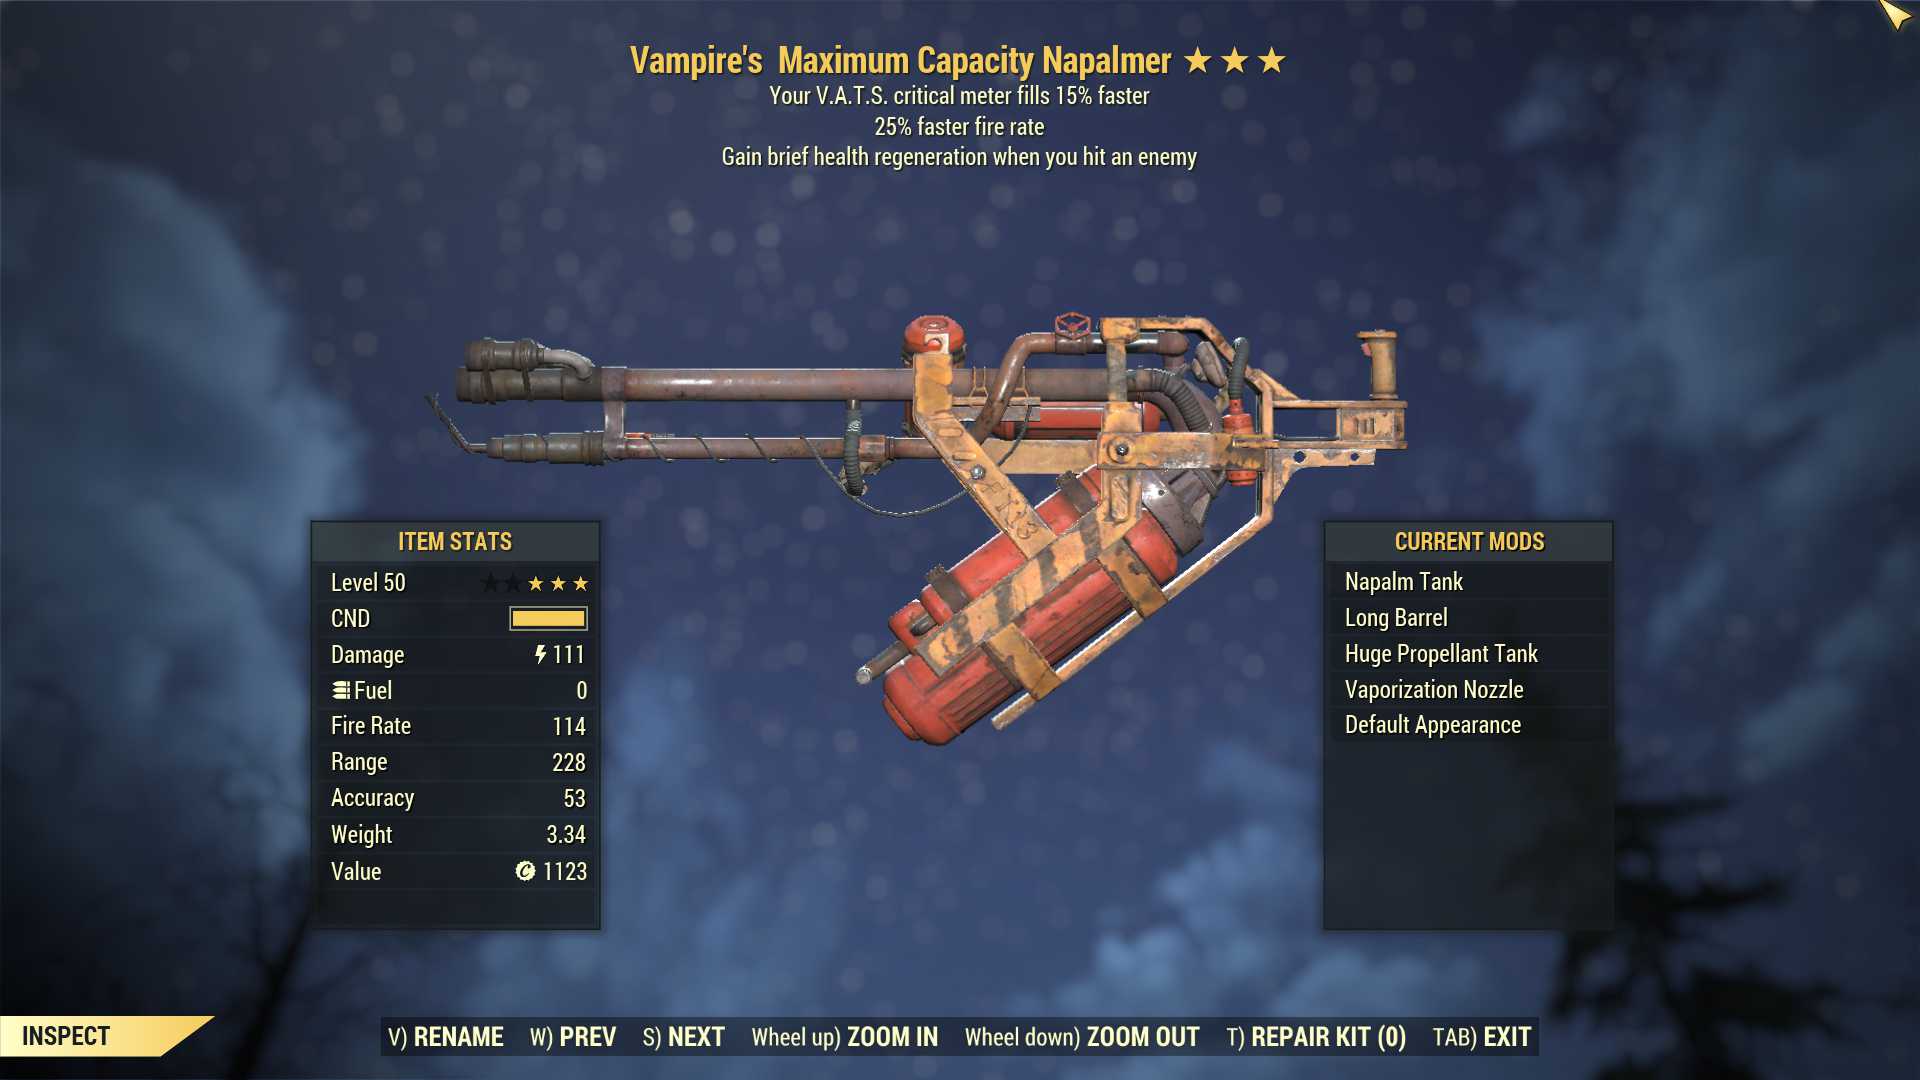 Vampire's Flamer (25% faster fire rate, VATS crit fills 15% faster)